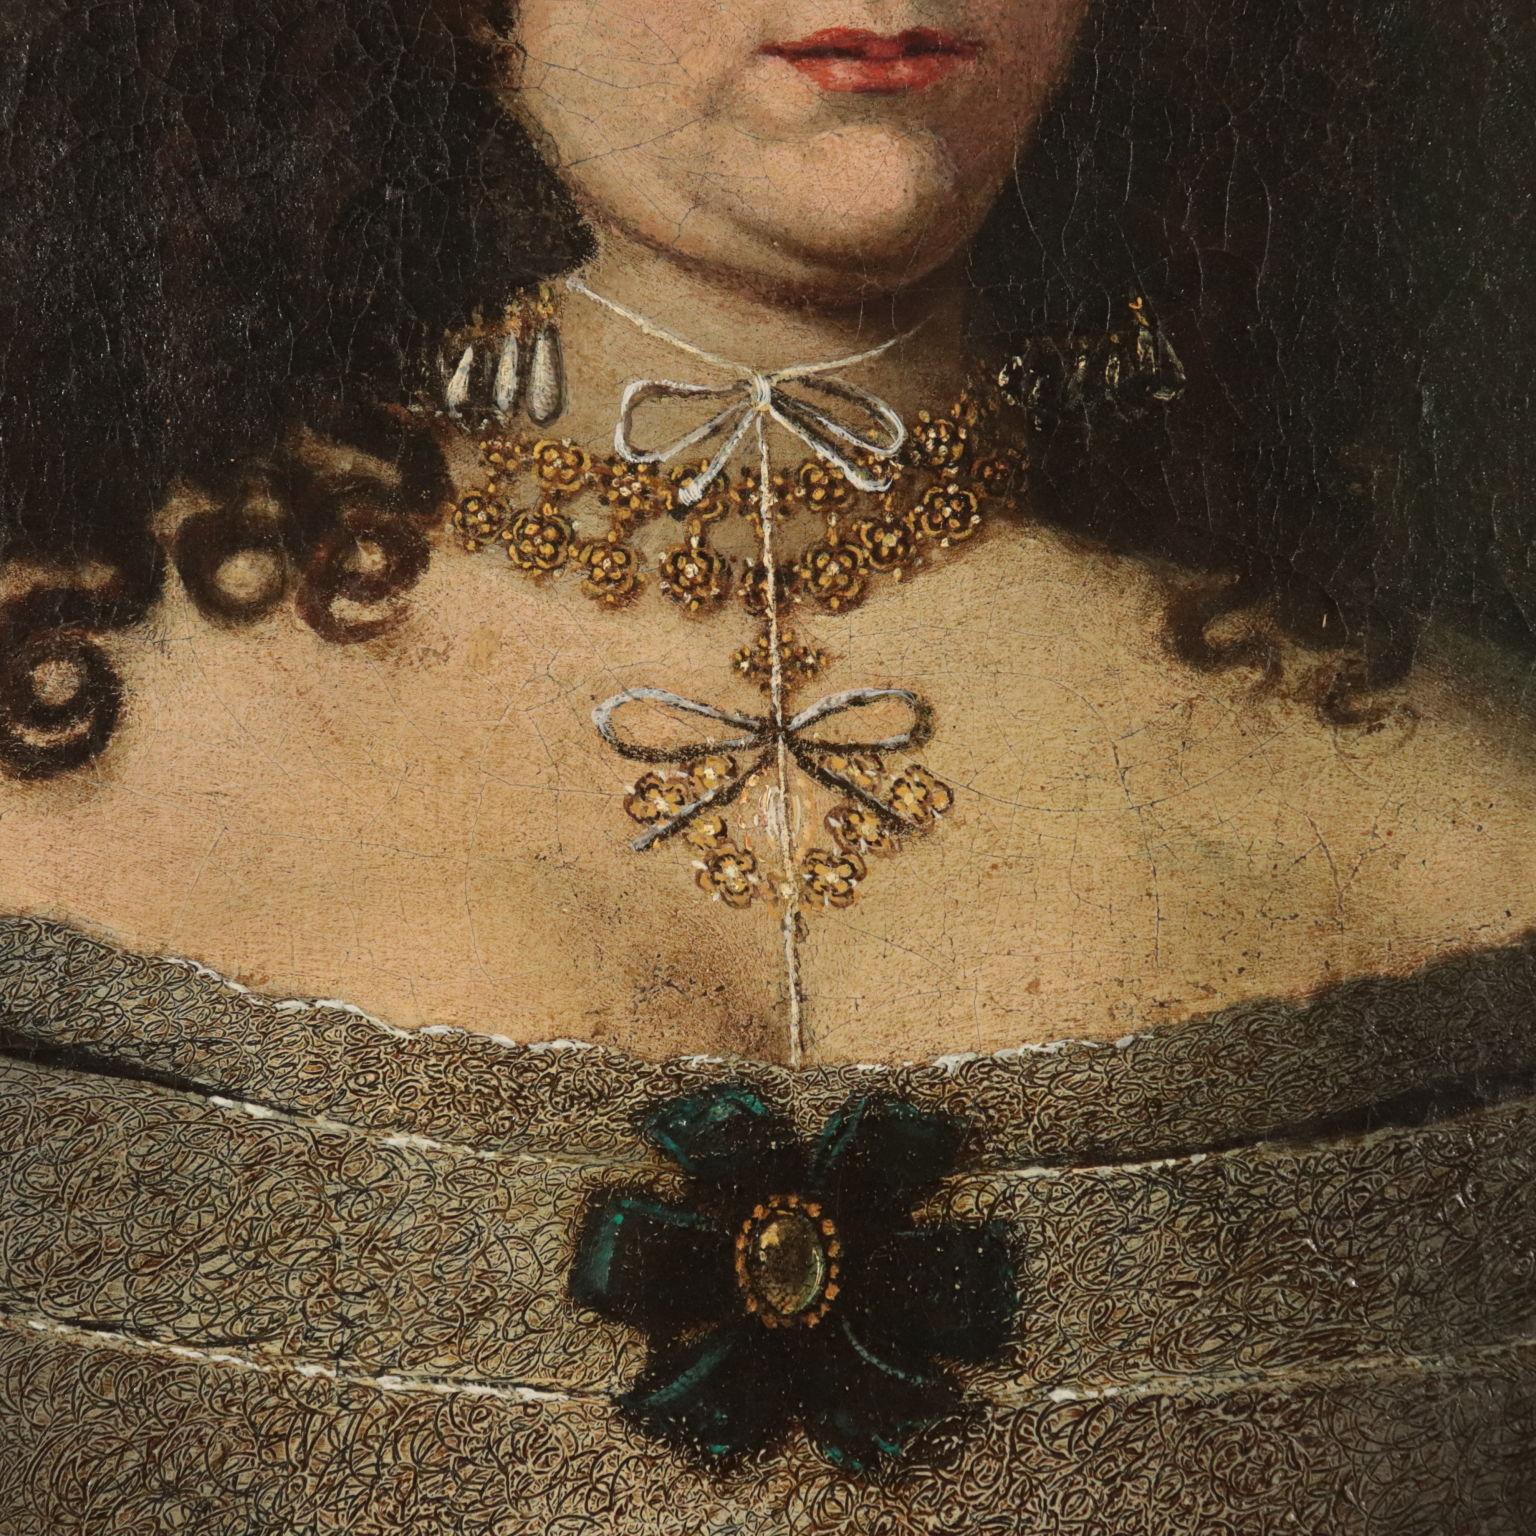 Oil on canvas. Portrait of a rich woman with an elegan gown embellished with shown off jewels lined up on a vertical line that starting from her face, down her neck, richly dressed up with a glod neckless, has her center on the cameo on the woman's